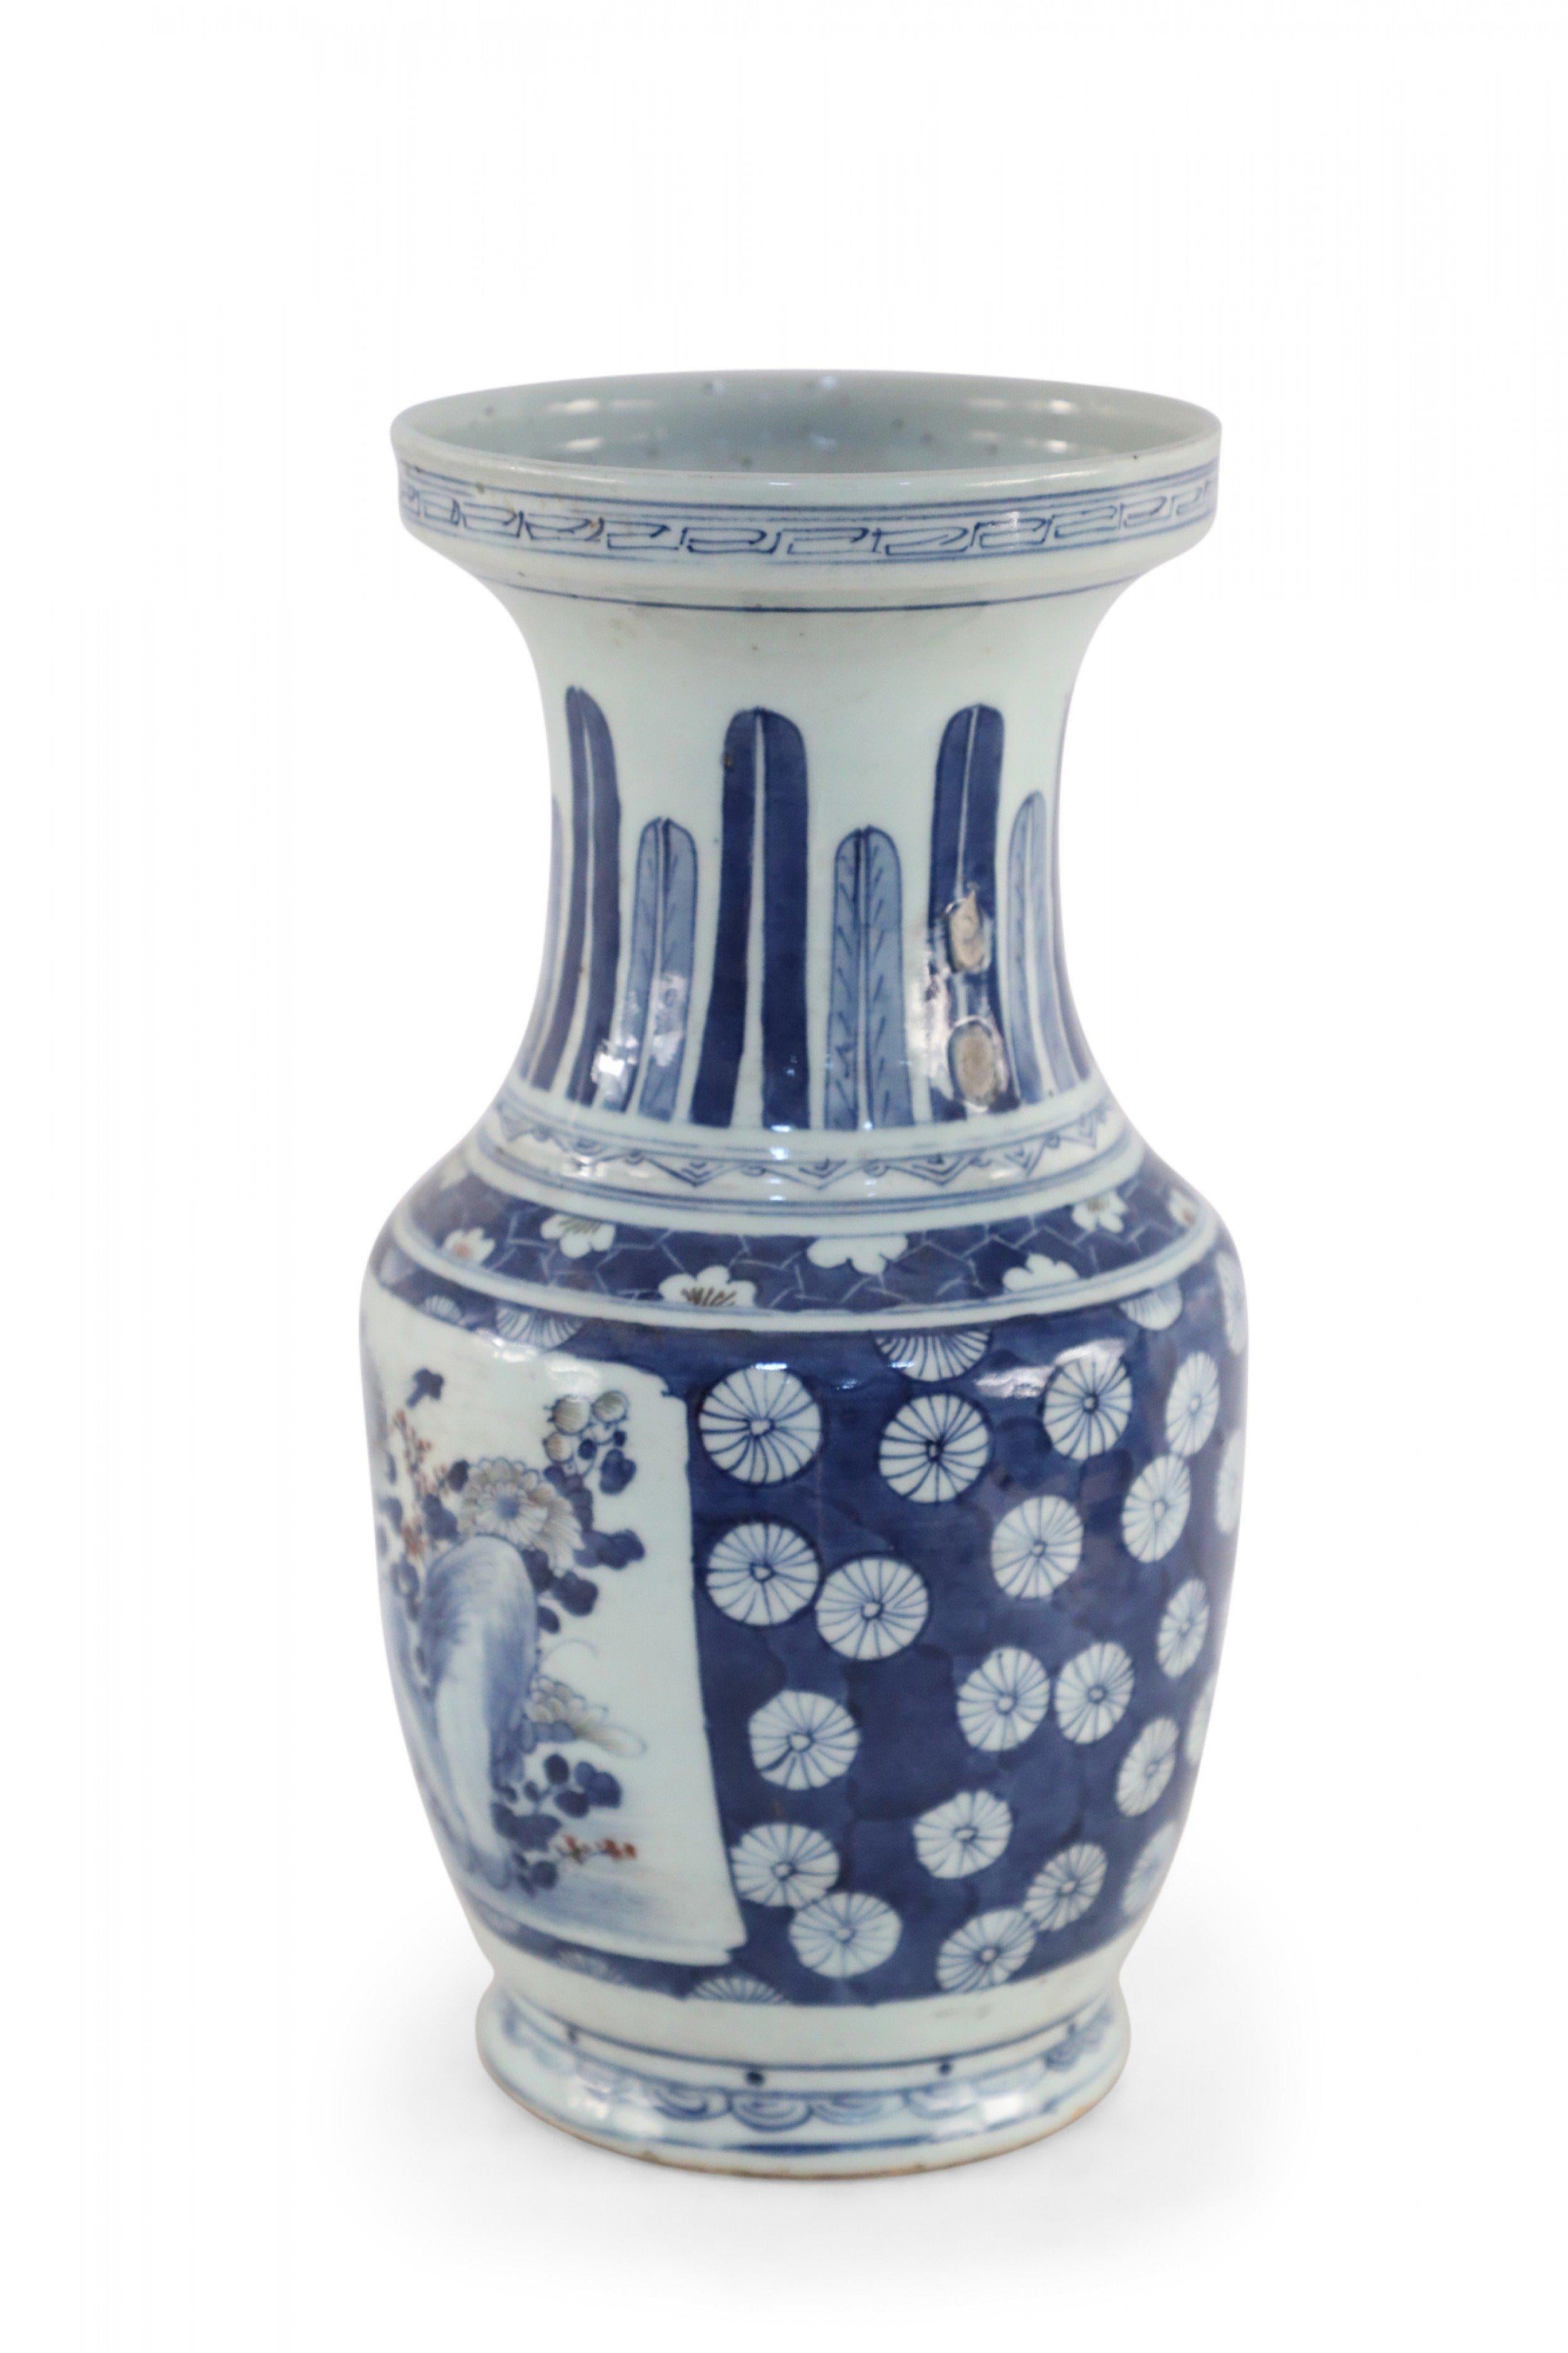 20th Century Chinese White and Blue Floral and Feather Motif Porcelain Urn For Sale